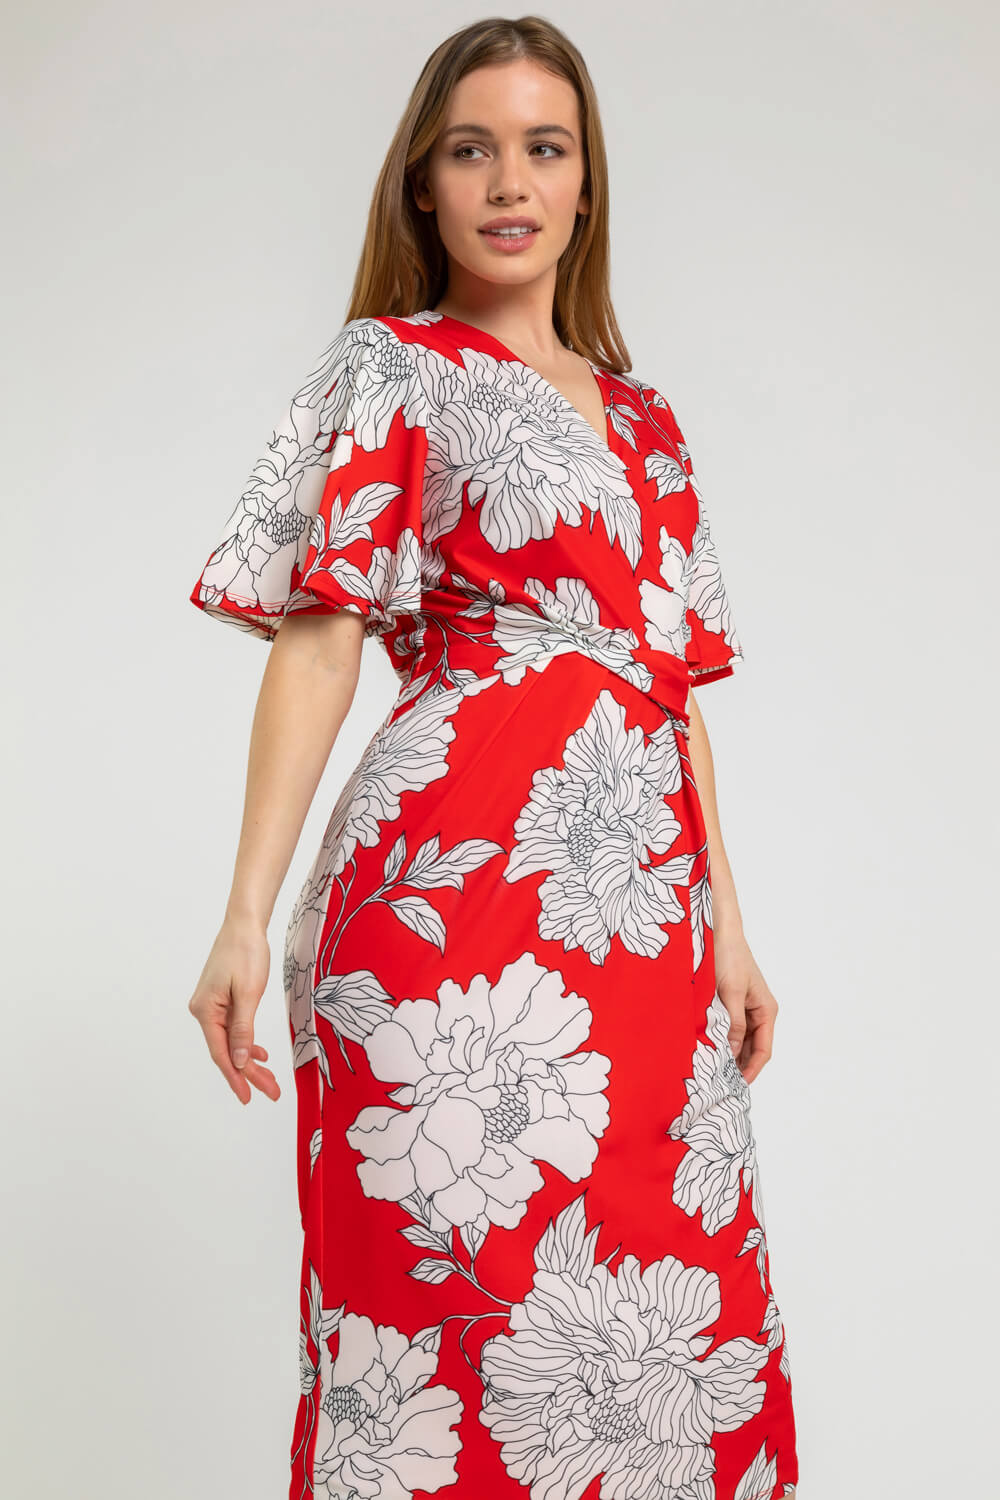 Petite Floral Ruched Wrap Dress in Red - Roman Originals UK